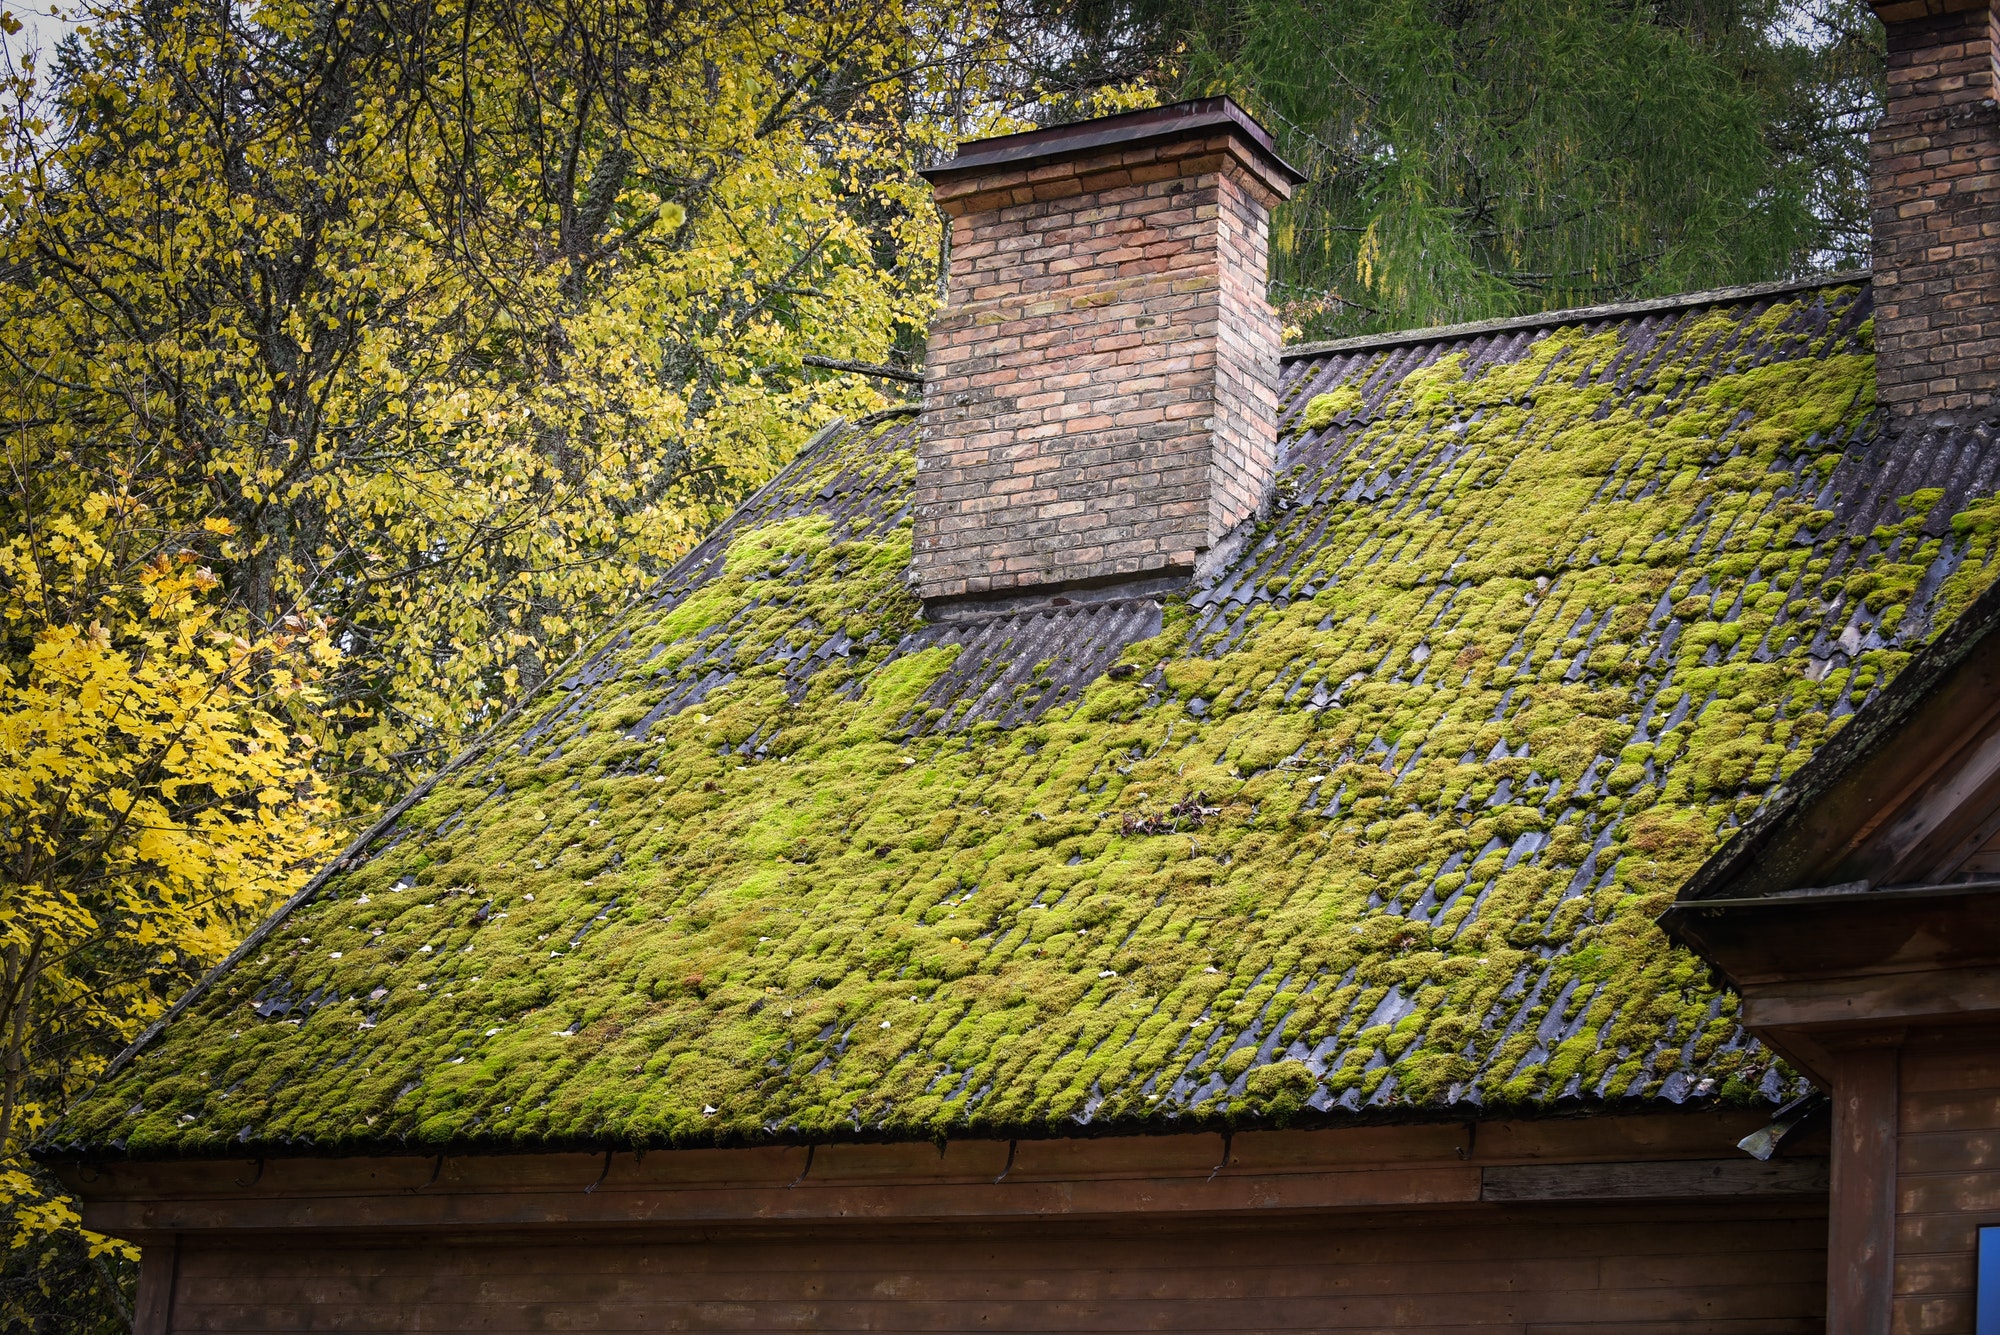 The roof surface of the house is overgrown with moss. Chimneys on the roof of the house